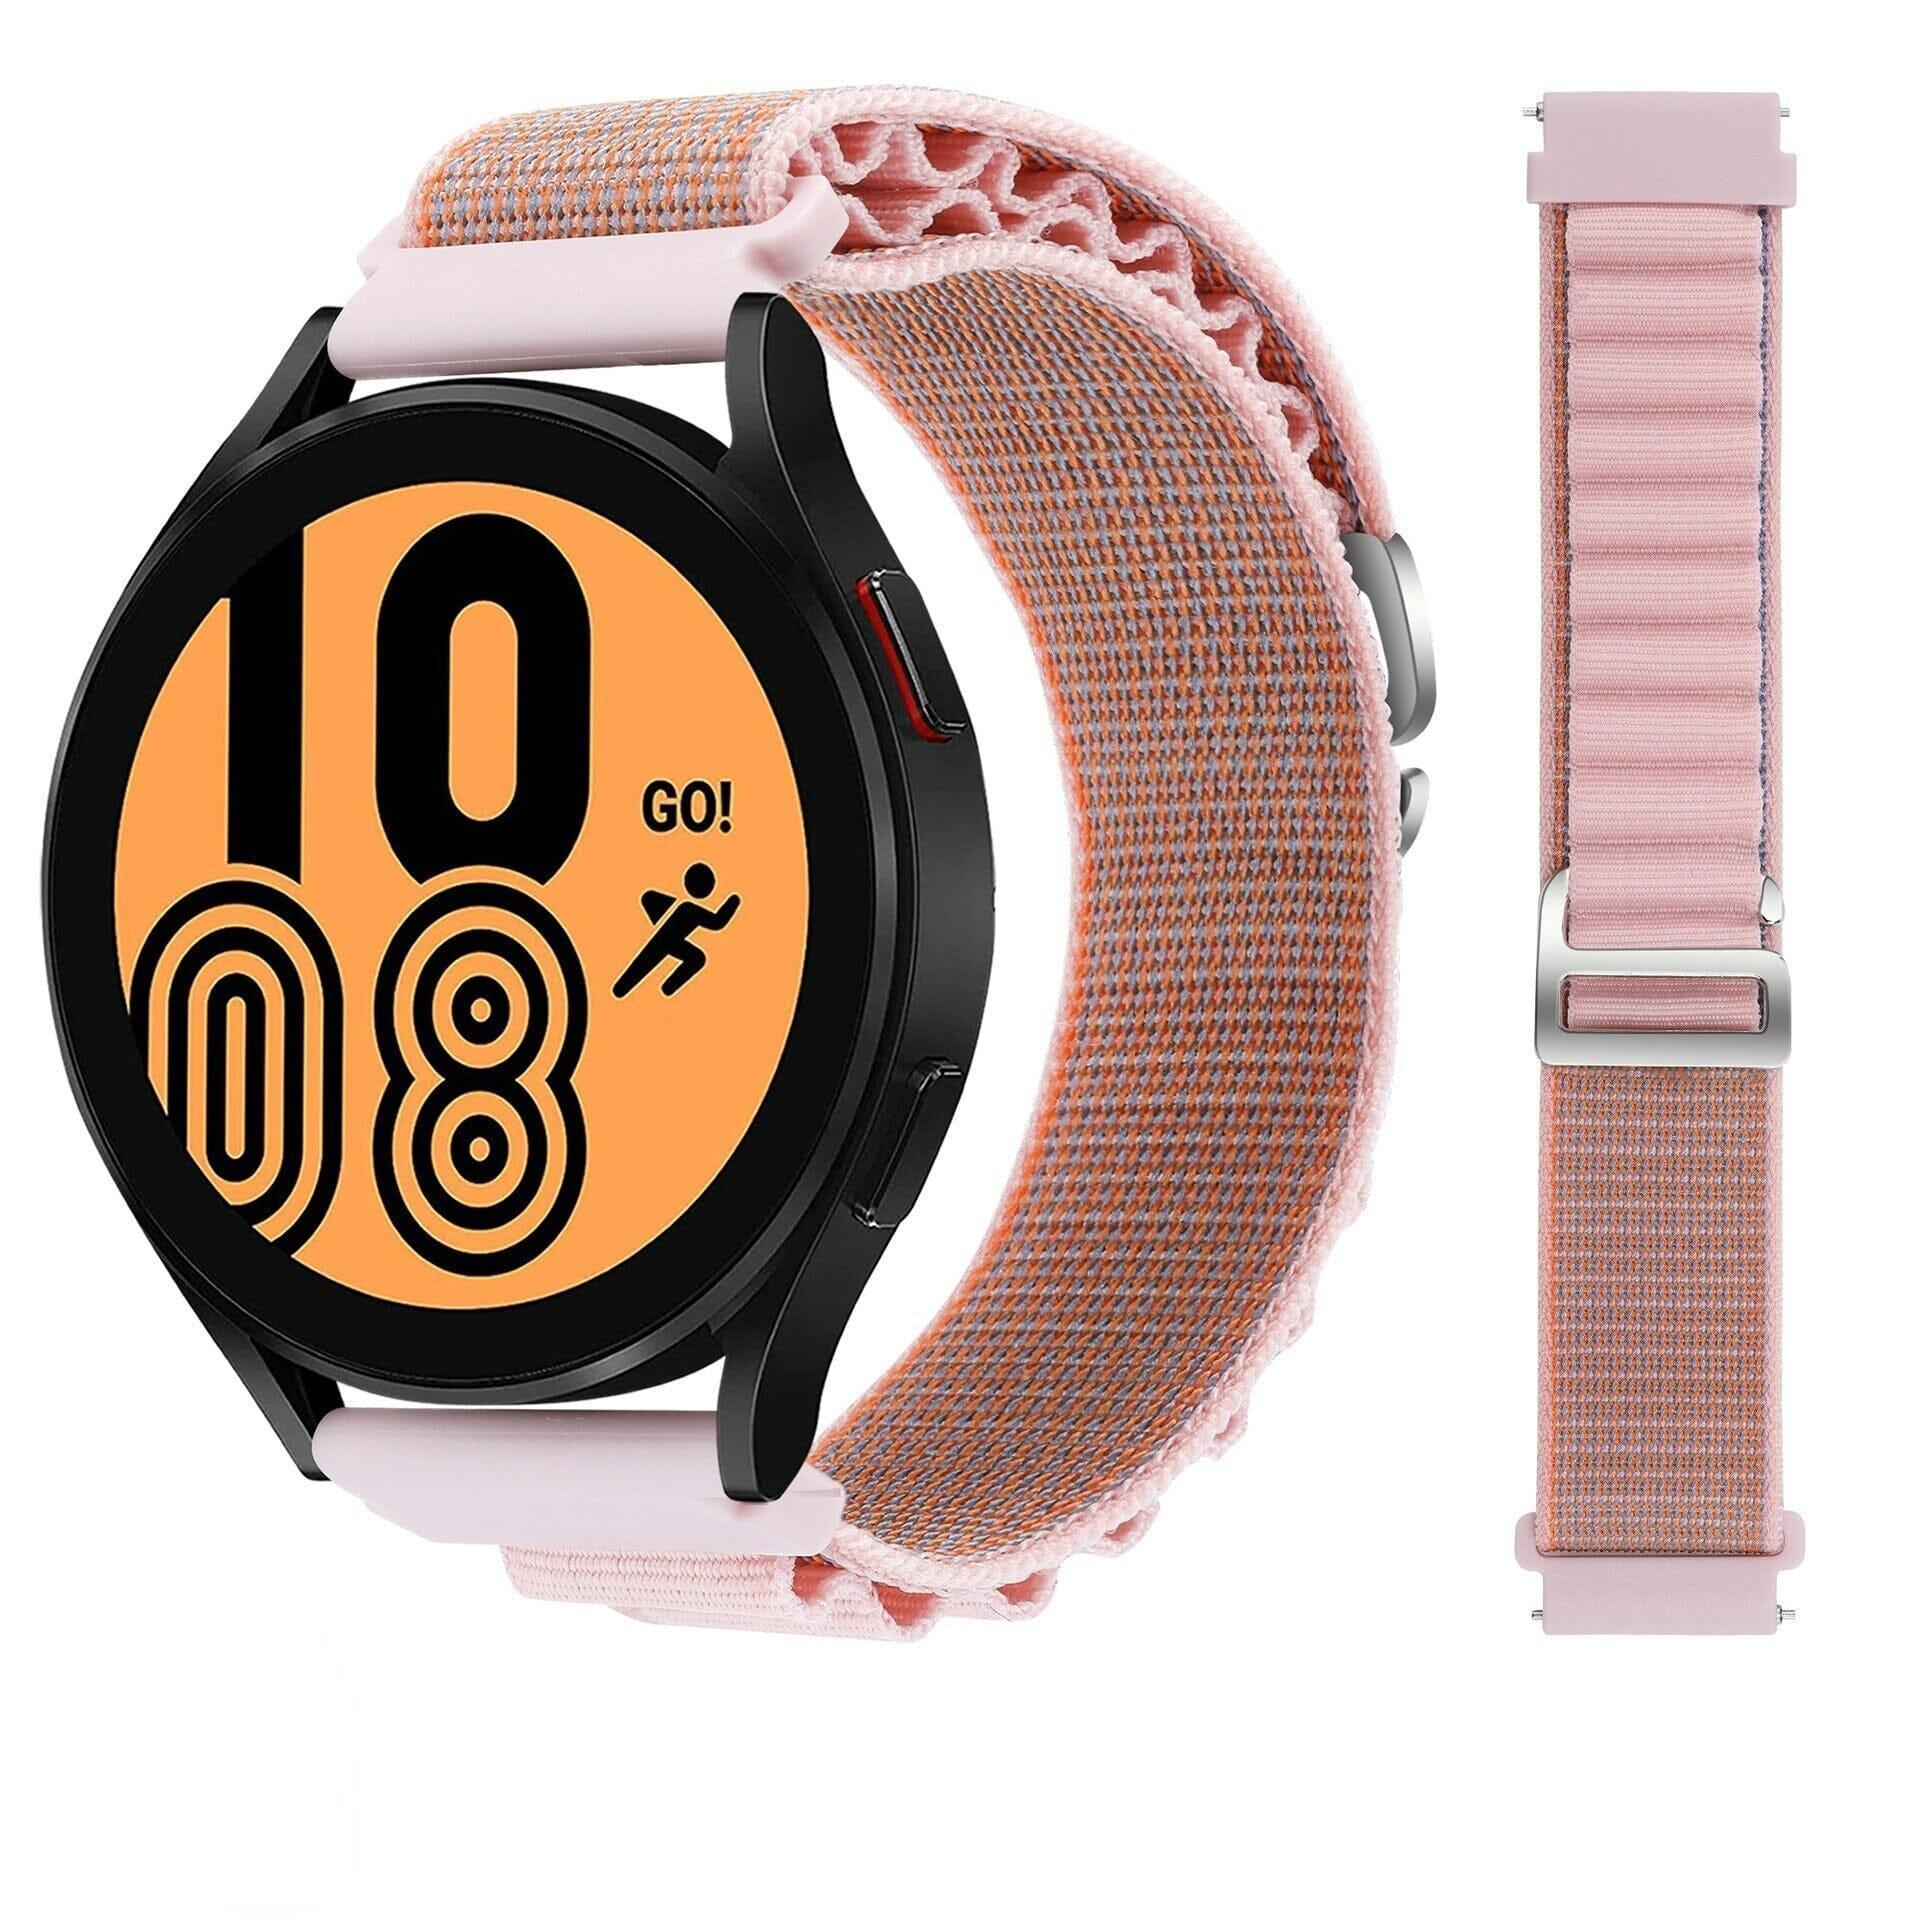 Alpine Loop Watch Straps Compatible with the LG Watch Sport